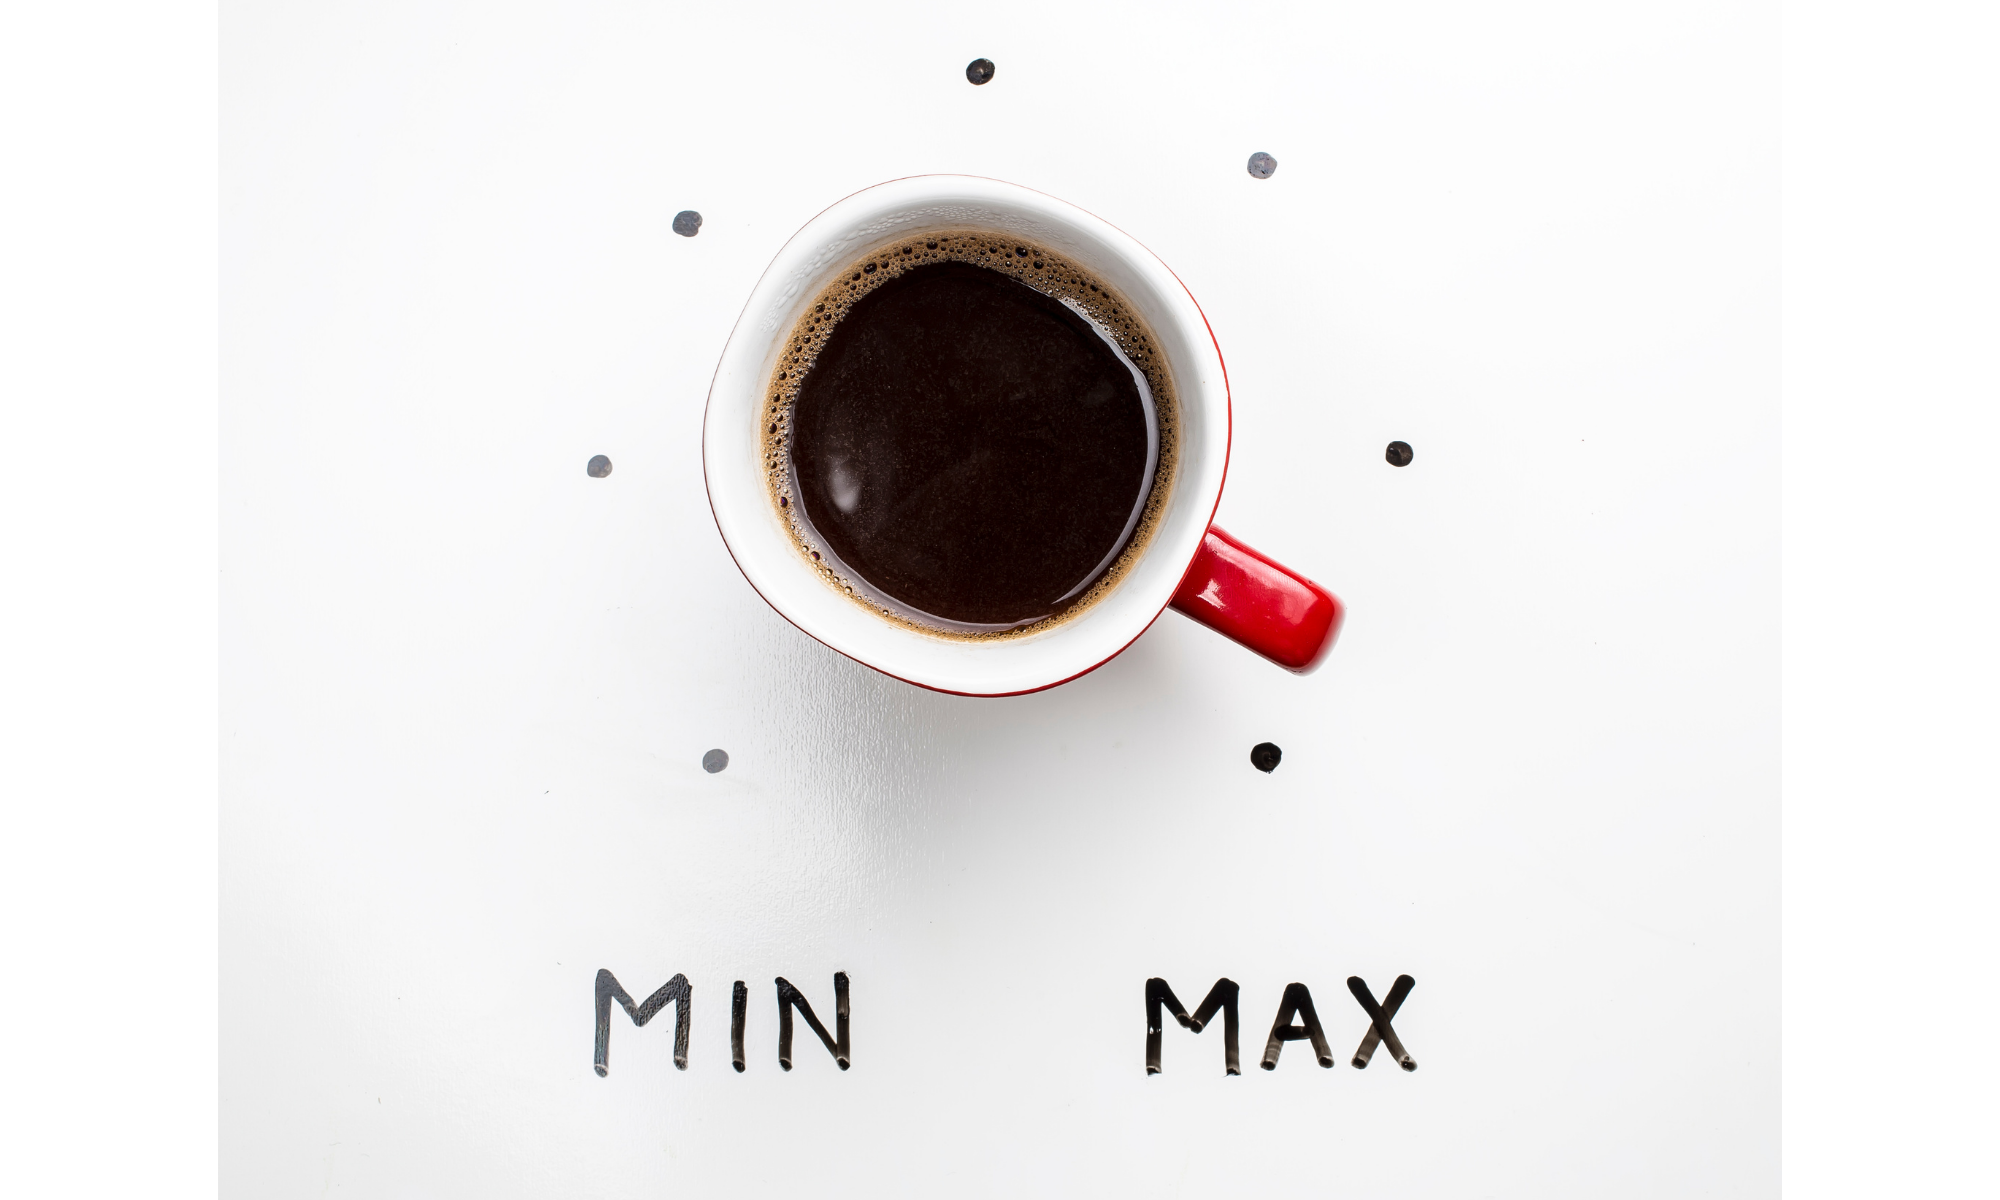 Cup of coffee with the word "Min" on the left, and "Max" on the right